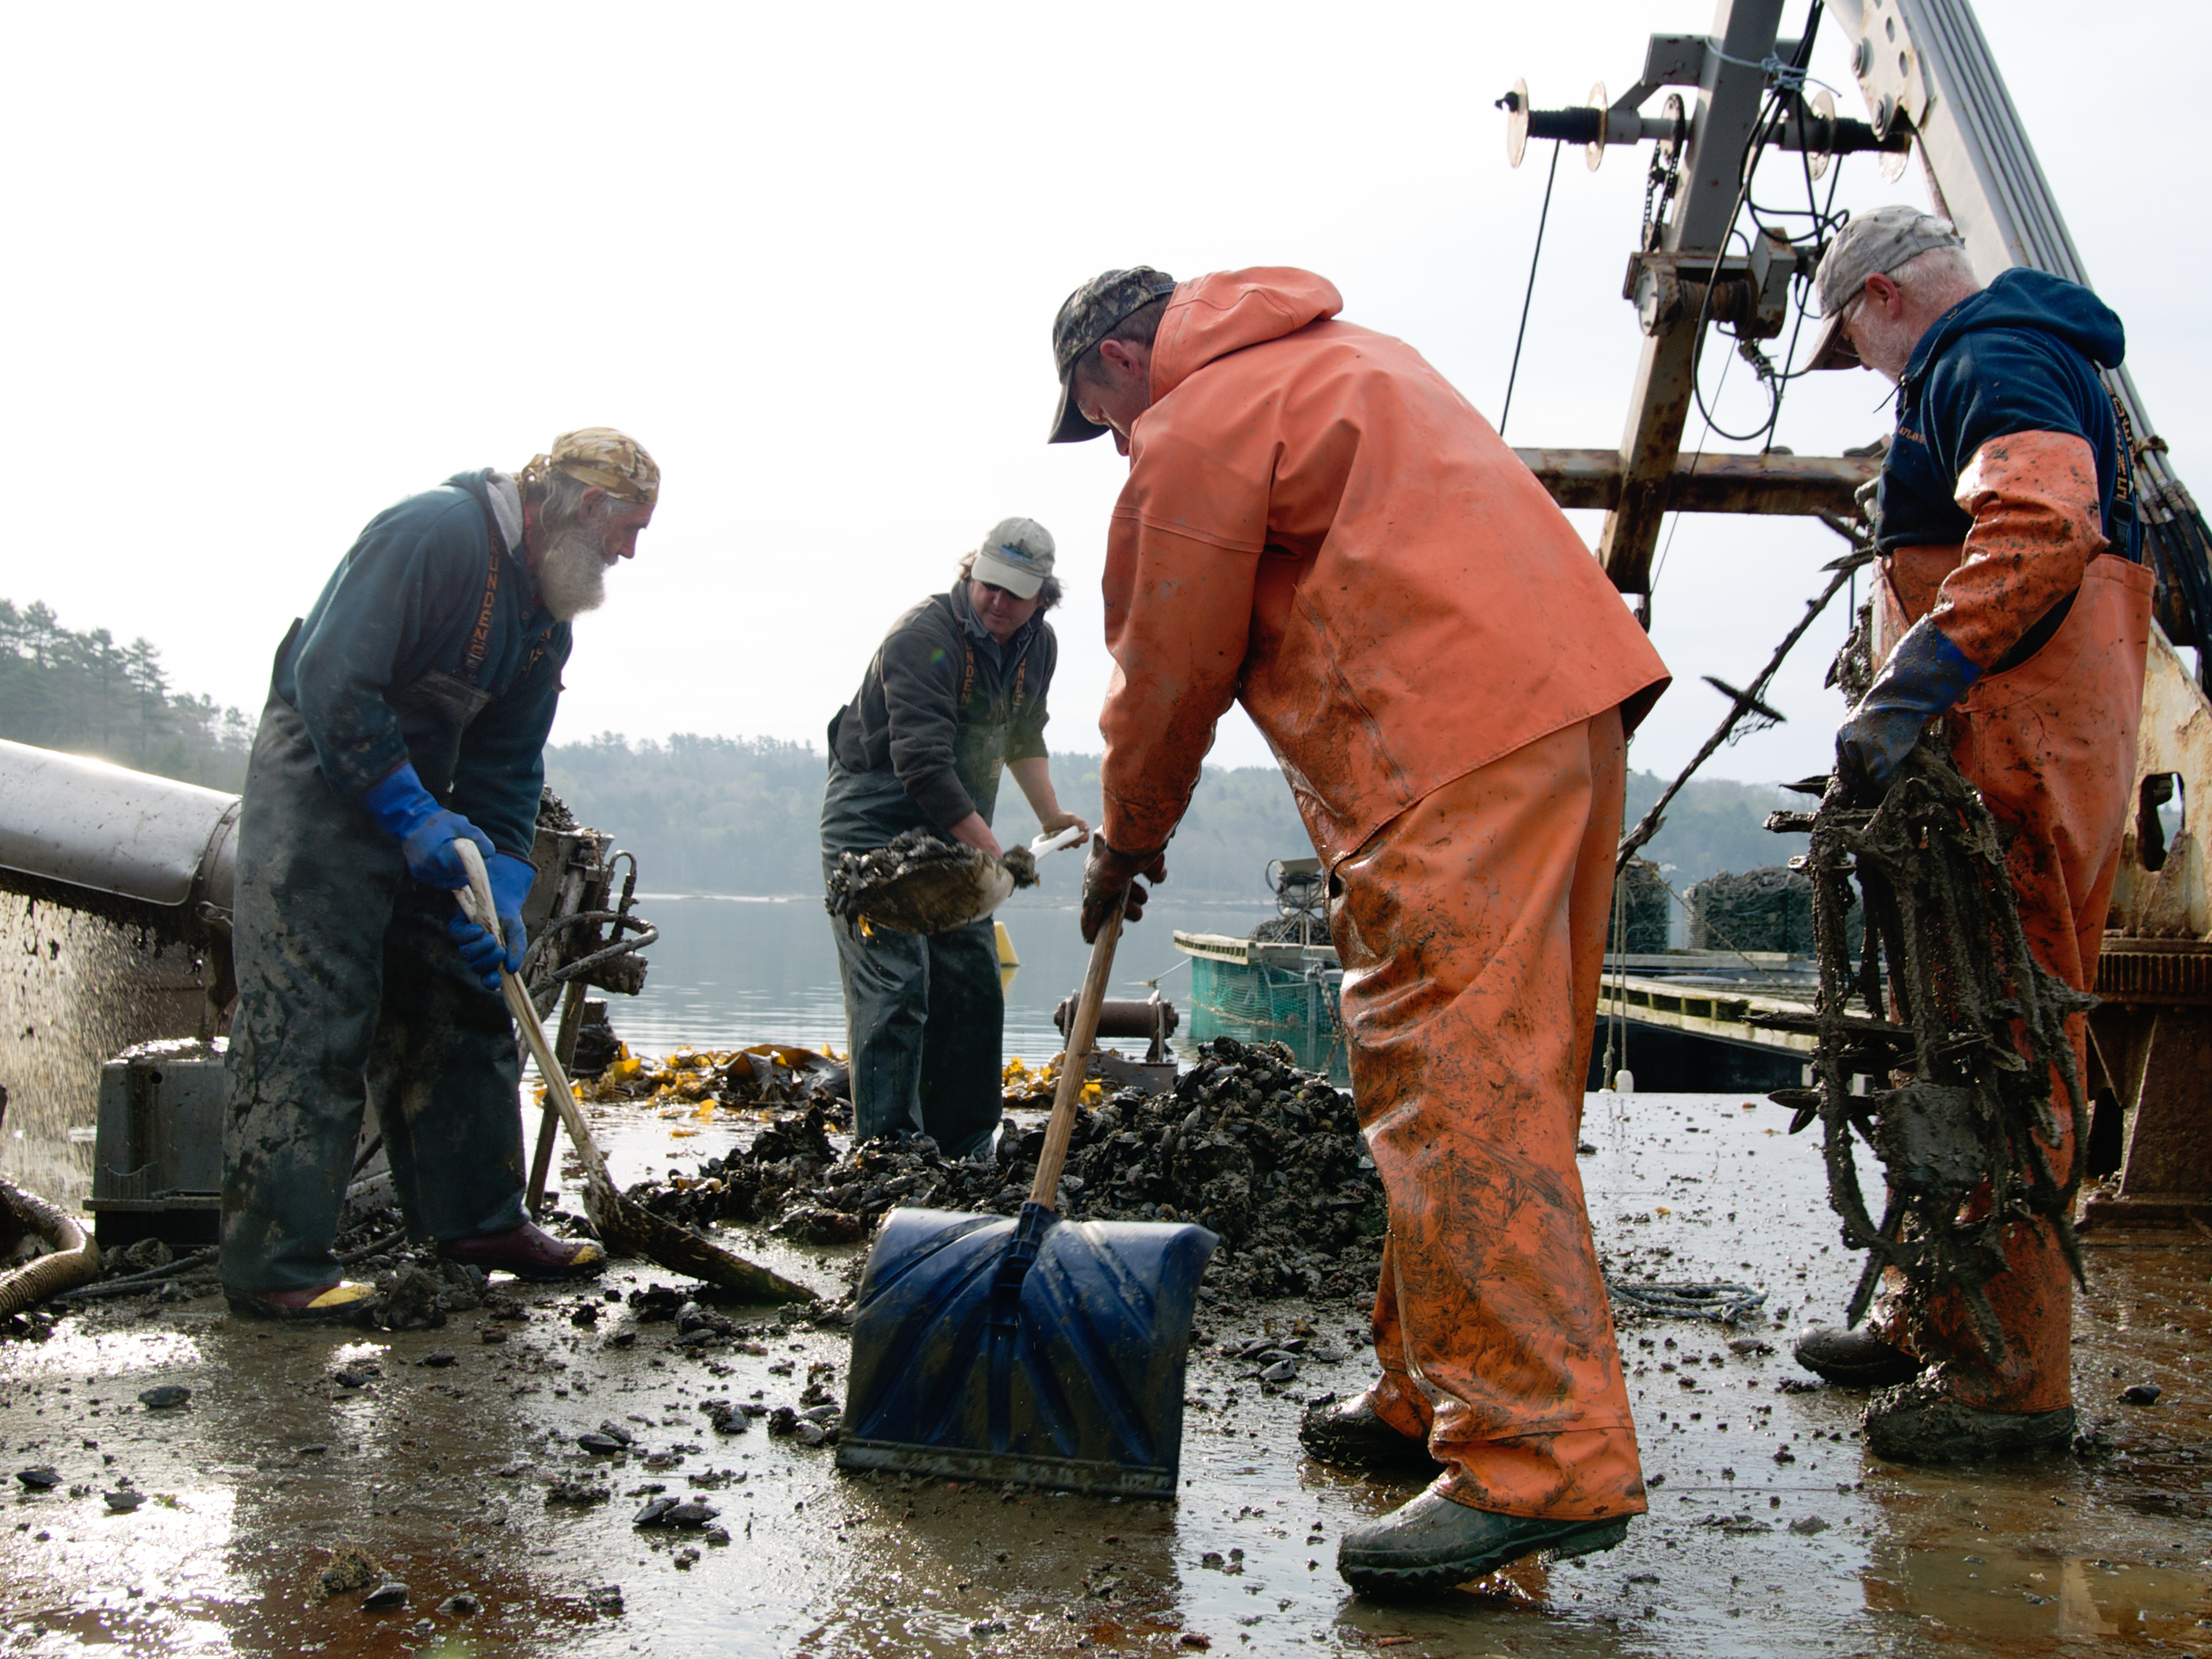  (05/09/09)&nbsp;Once the mussels are deposited onto the deck of the barge they have to be shaken off the ropes by hand. Mud flies in the air and Peter Fischer (left) and Greg Thompson (right) end up covered from head to toe by the end of it. 